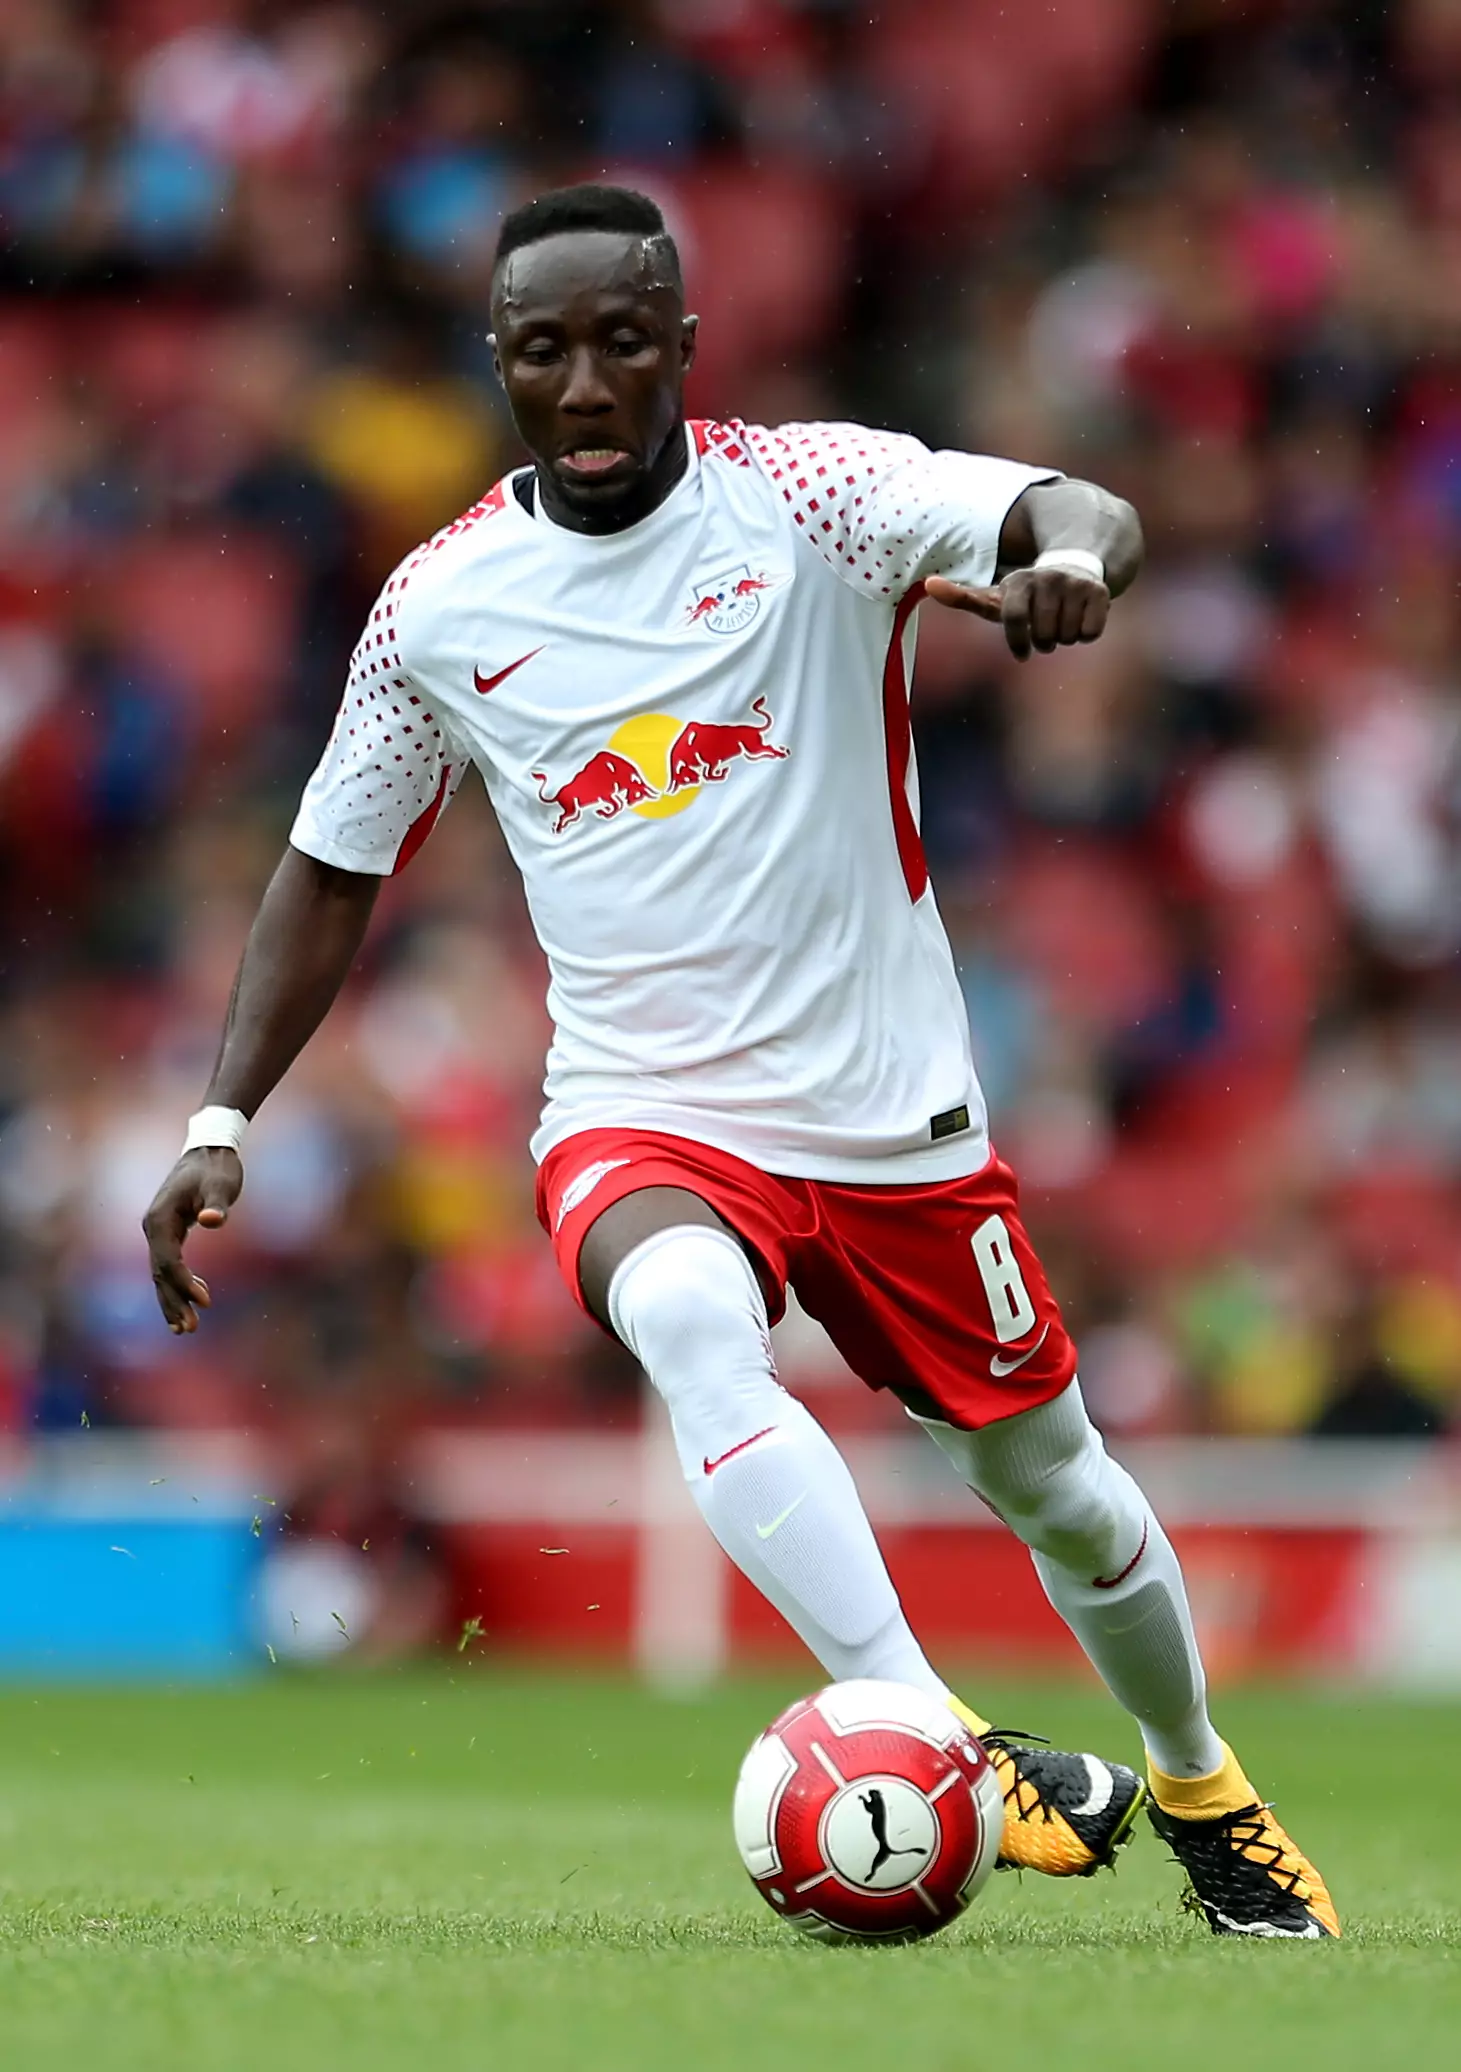 Naby Keita will slot nicely into Liverpool's midfield. Image: PA Images